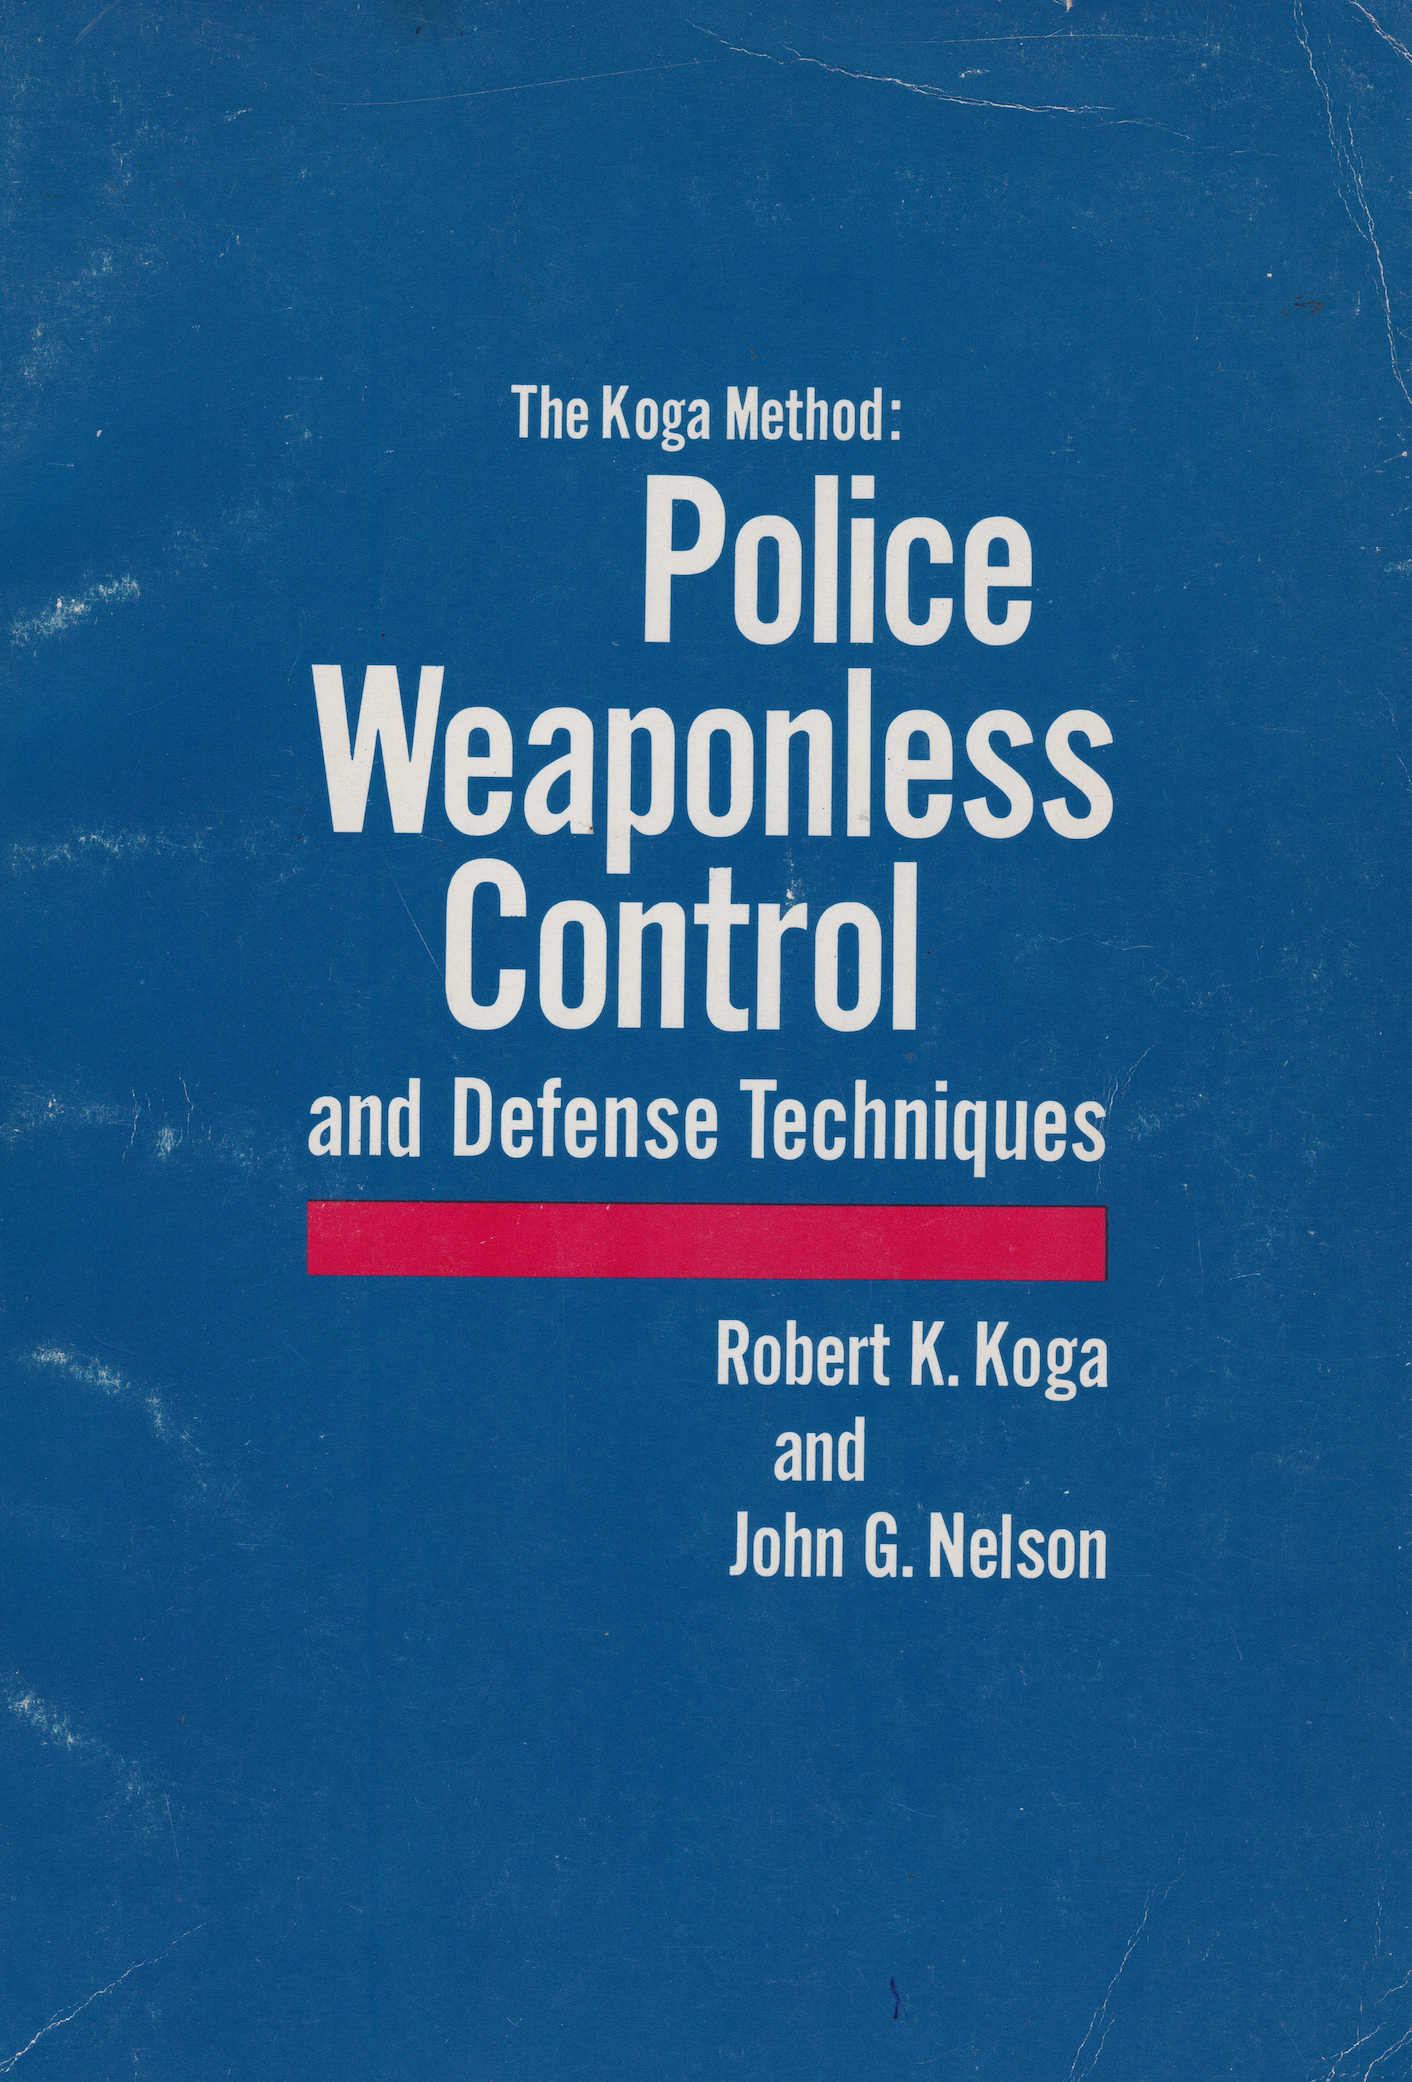 The Koga Method: Police Weaponless Control and Defense Techniques Book by Robert Koga (Hardcover)(Preowned)